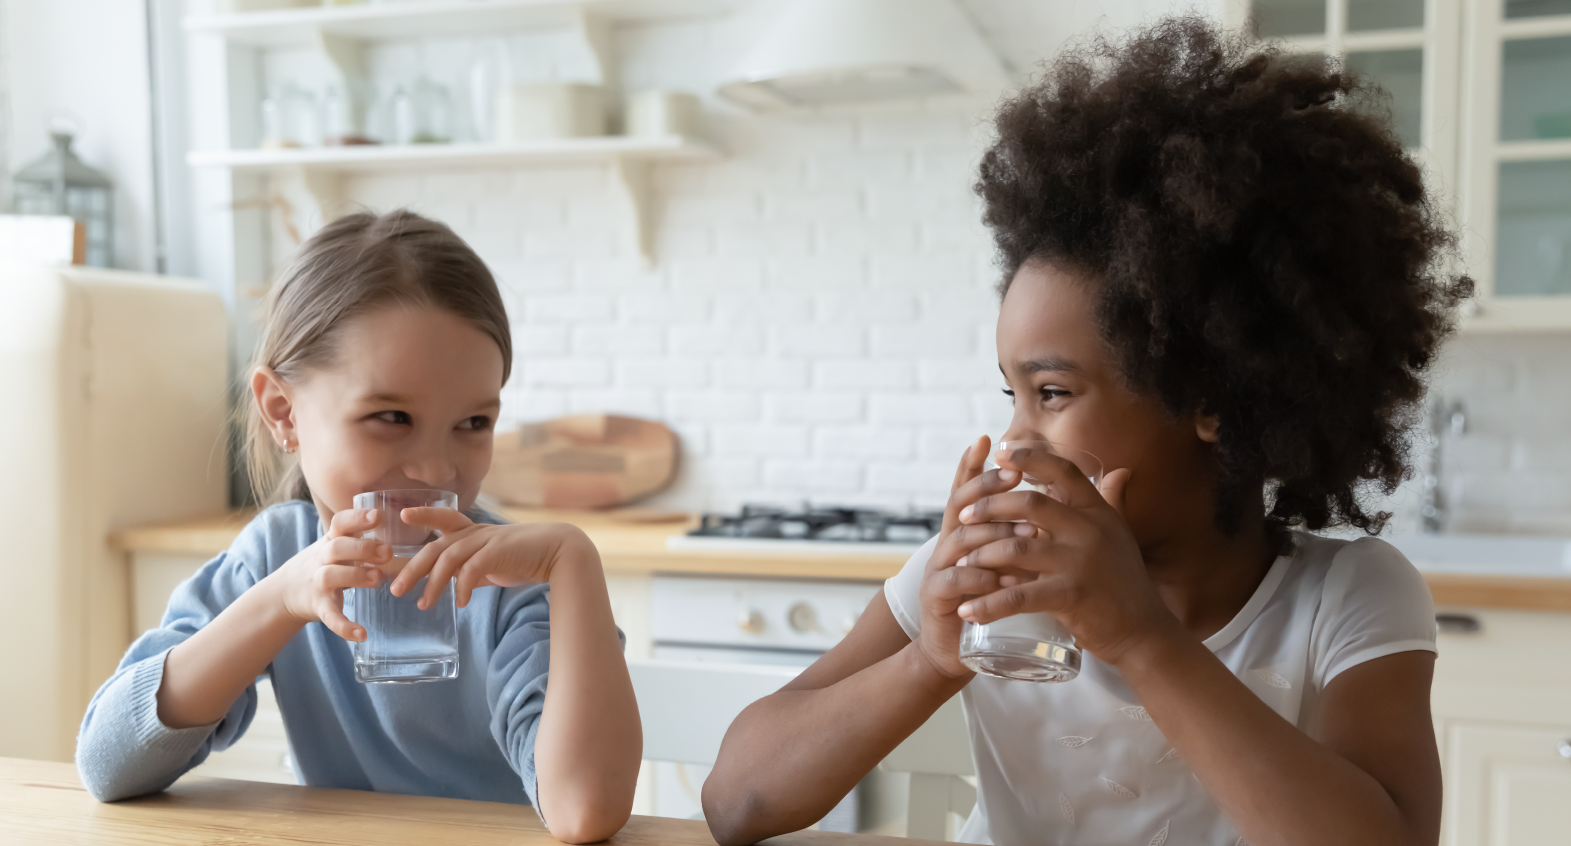 two children in a kitchen drinking glasses of water